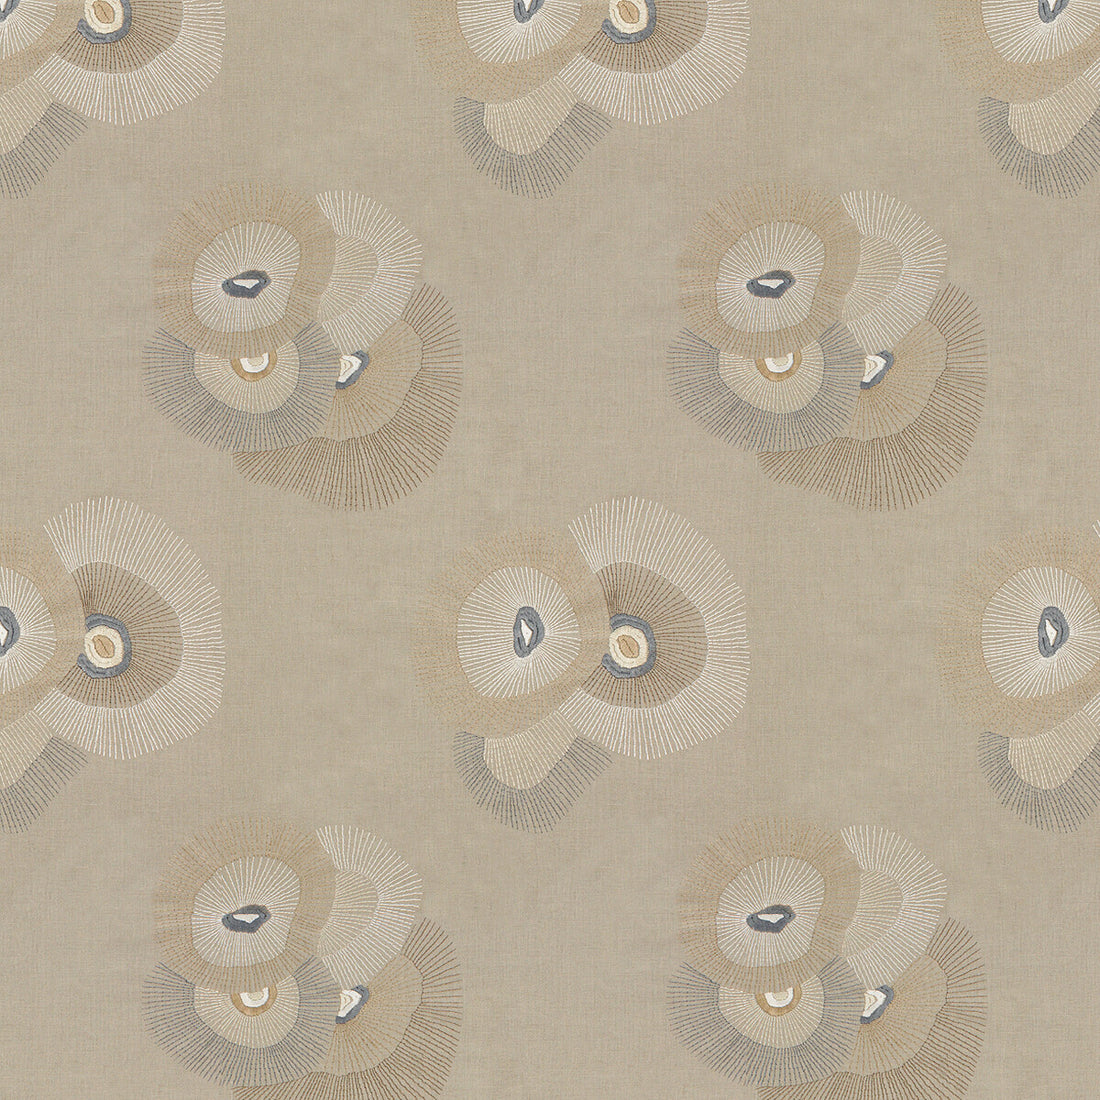 Bloom Emb fabric in linen/graphite color - pattern GWF-3108.611.0 - by Lee Jofa Modern in the Kelly Wearstler II collection